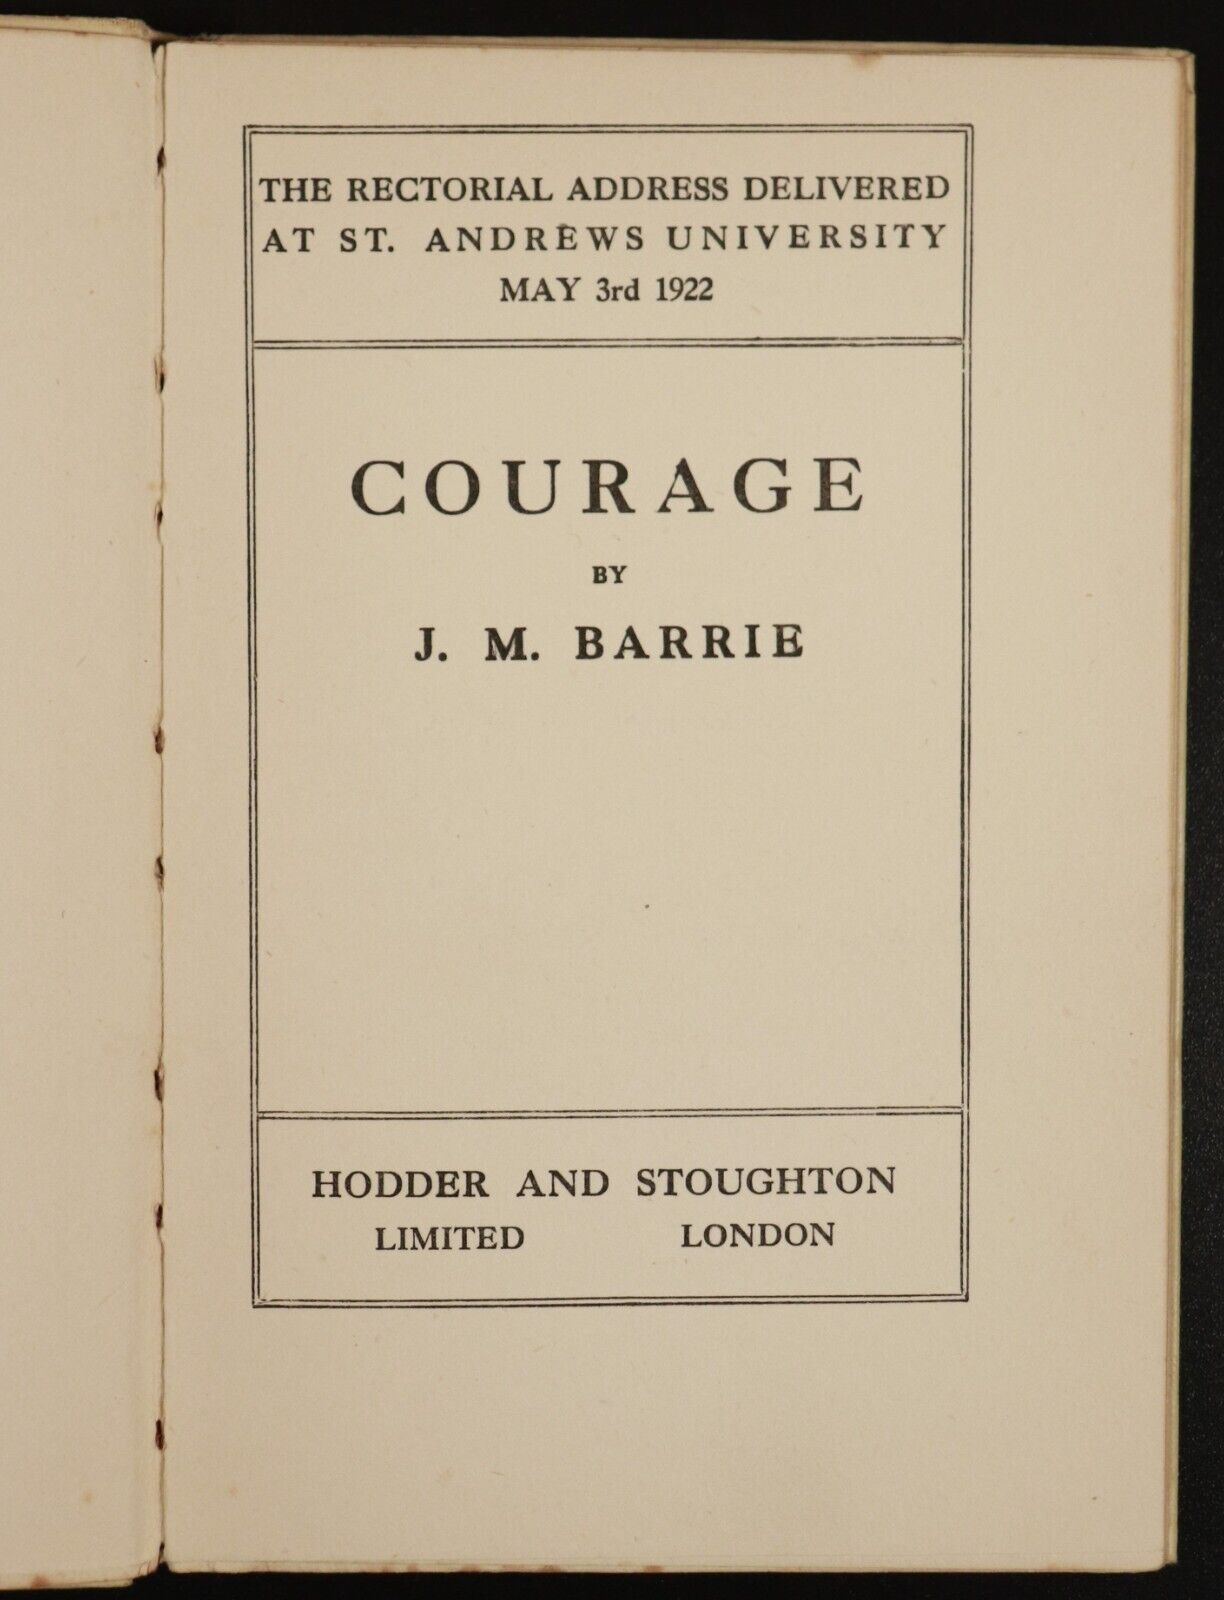 1922 Courage by J.M. Barrie Rectoral Address At St Andrews Antique Book - 0